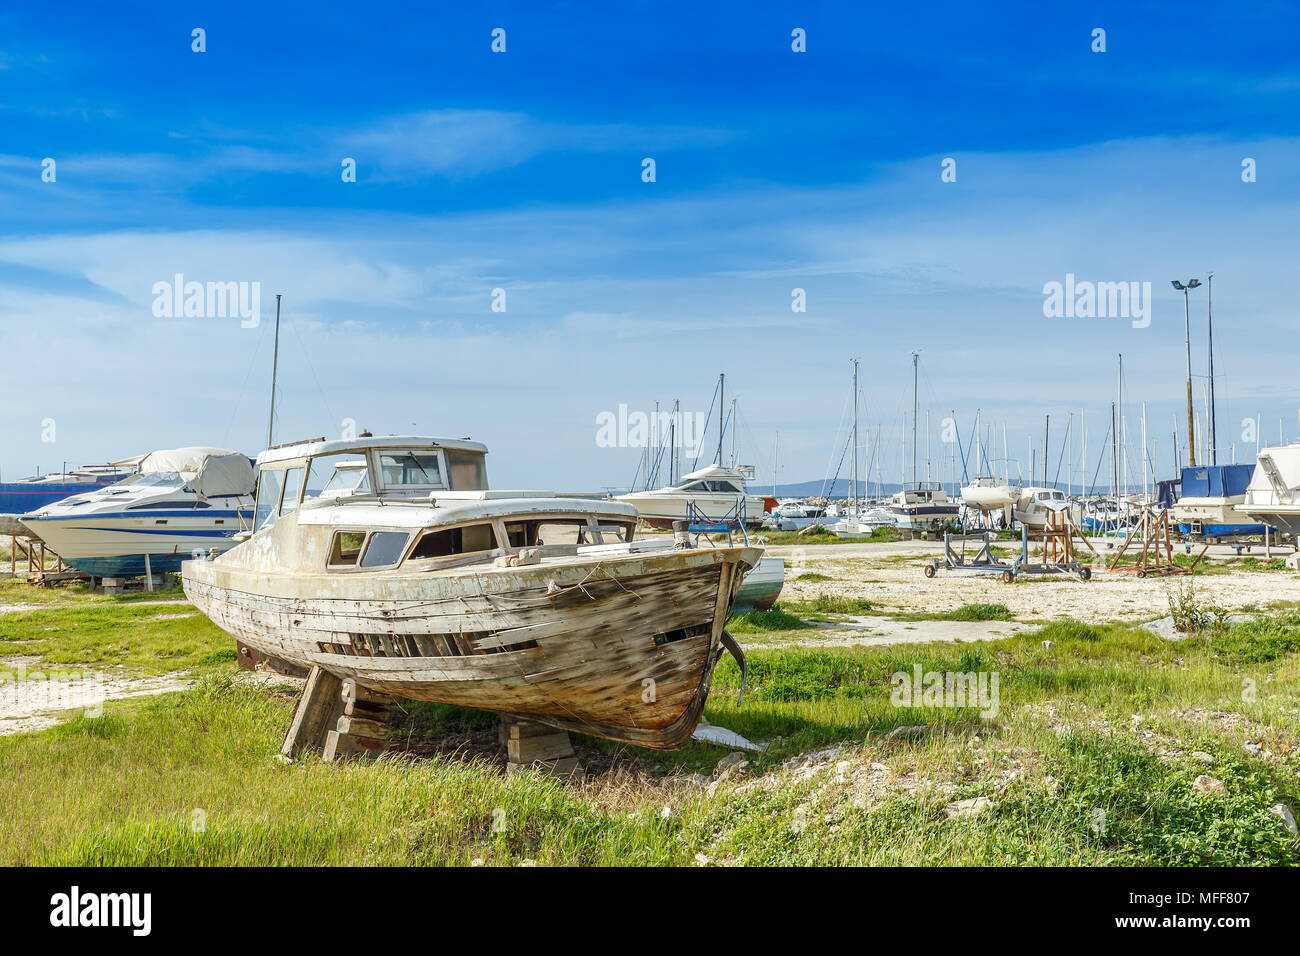 An old abandoned wooden ship wreck in Split, Croatia Stock Photo